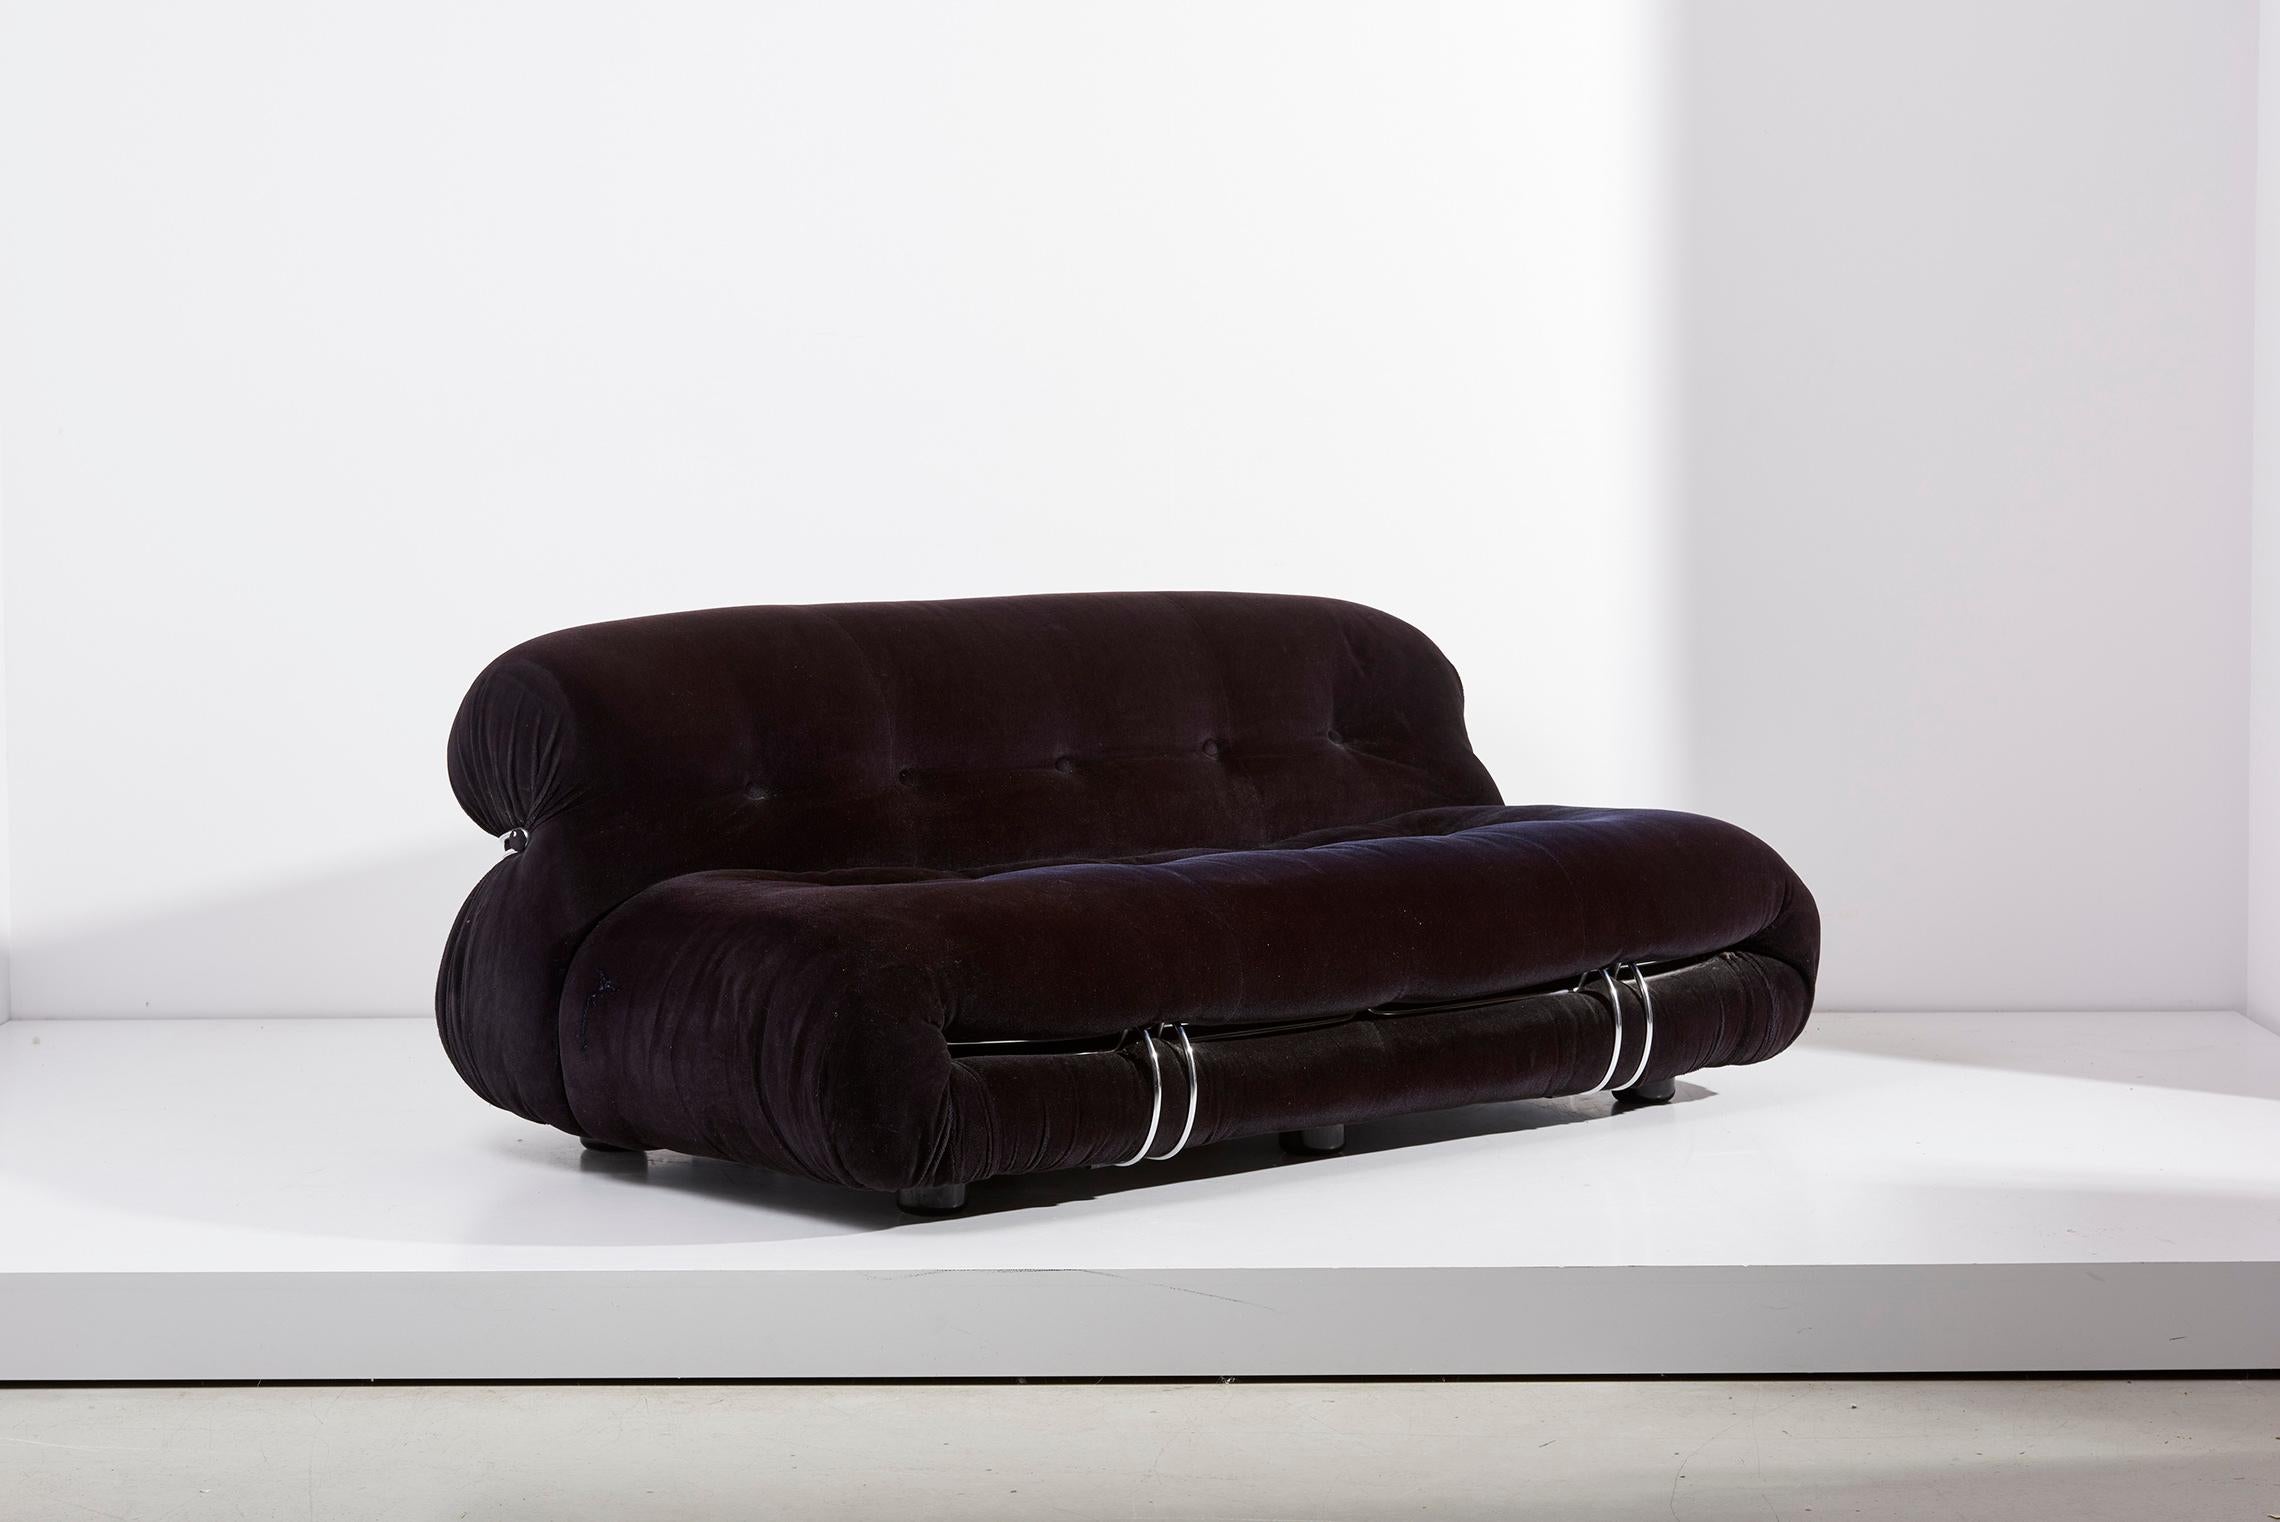 Afra & Tobia Scarpa “Soriana” sofa for Cassina, Italy, 1960s.
This Sofa is in its original black velvet fabric in very good condition.